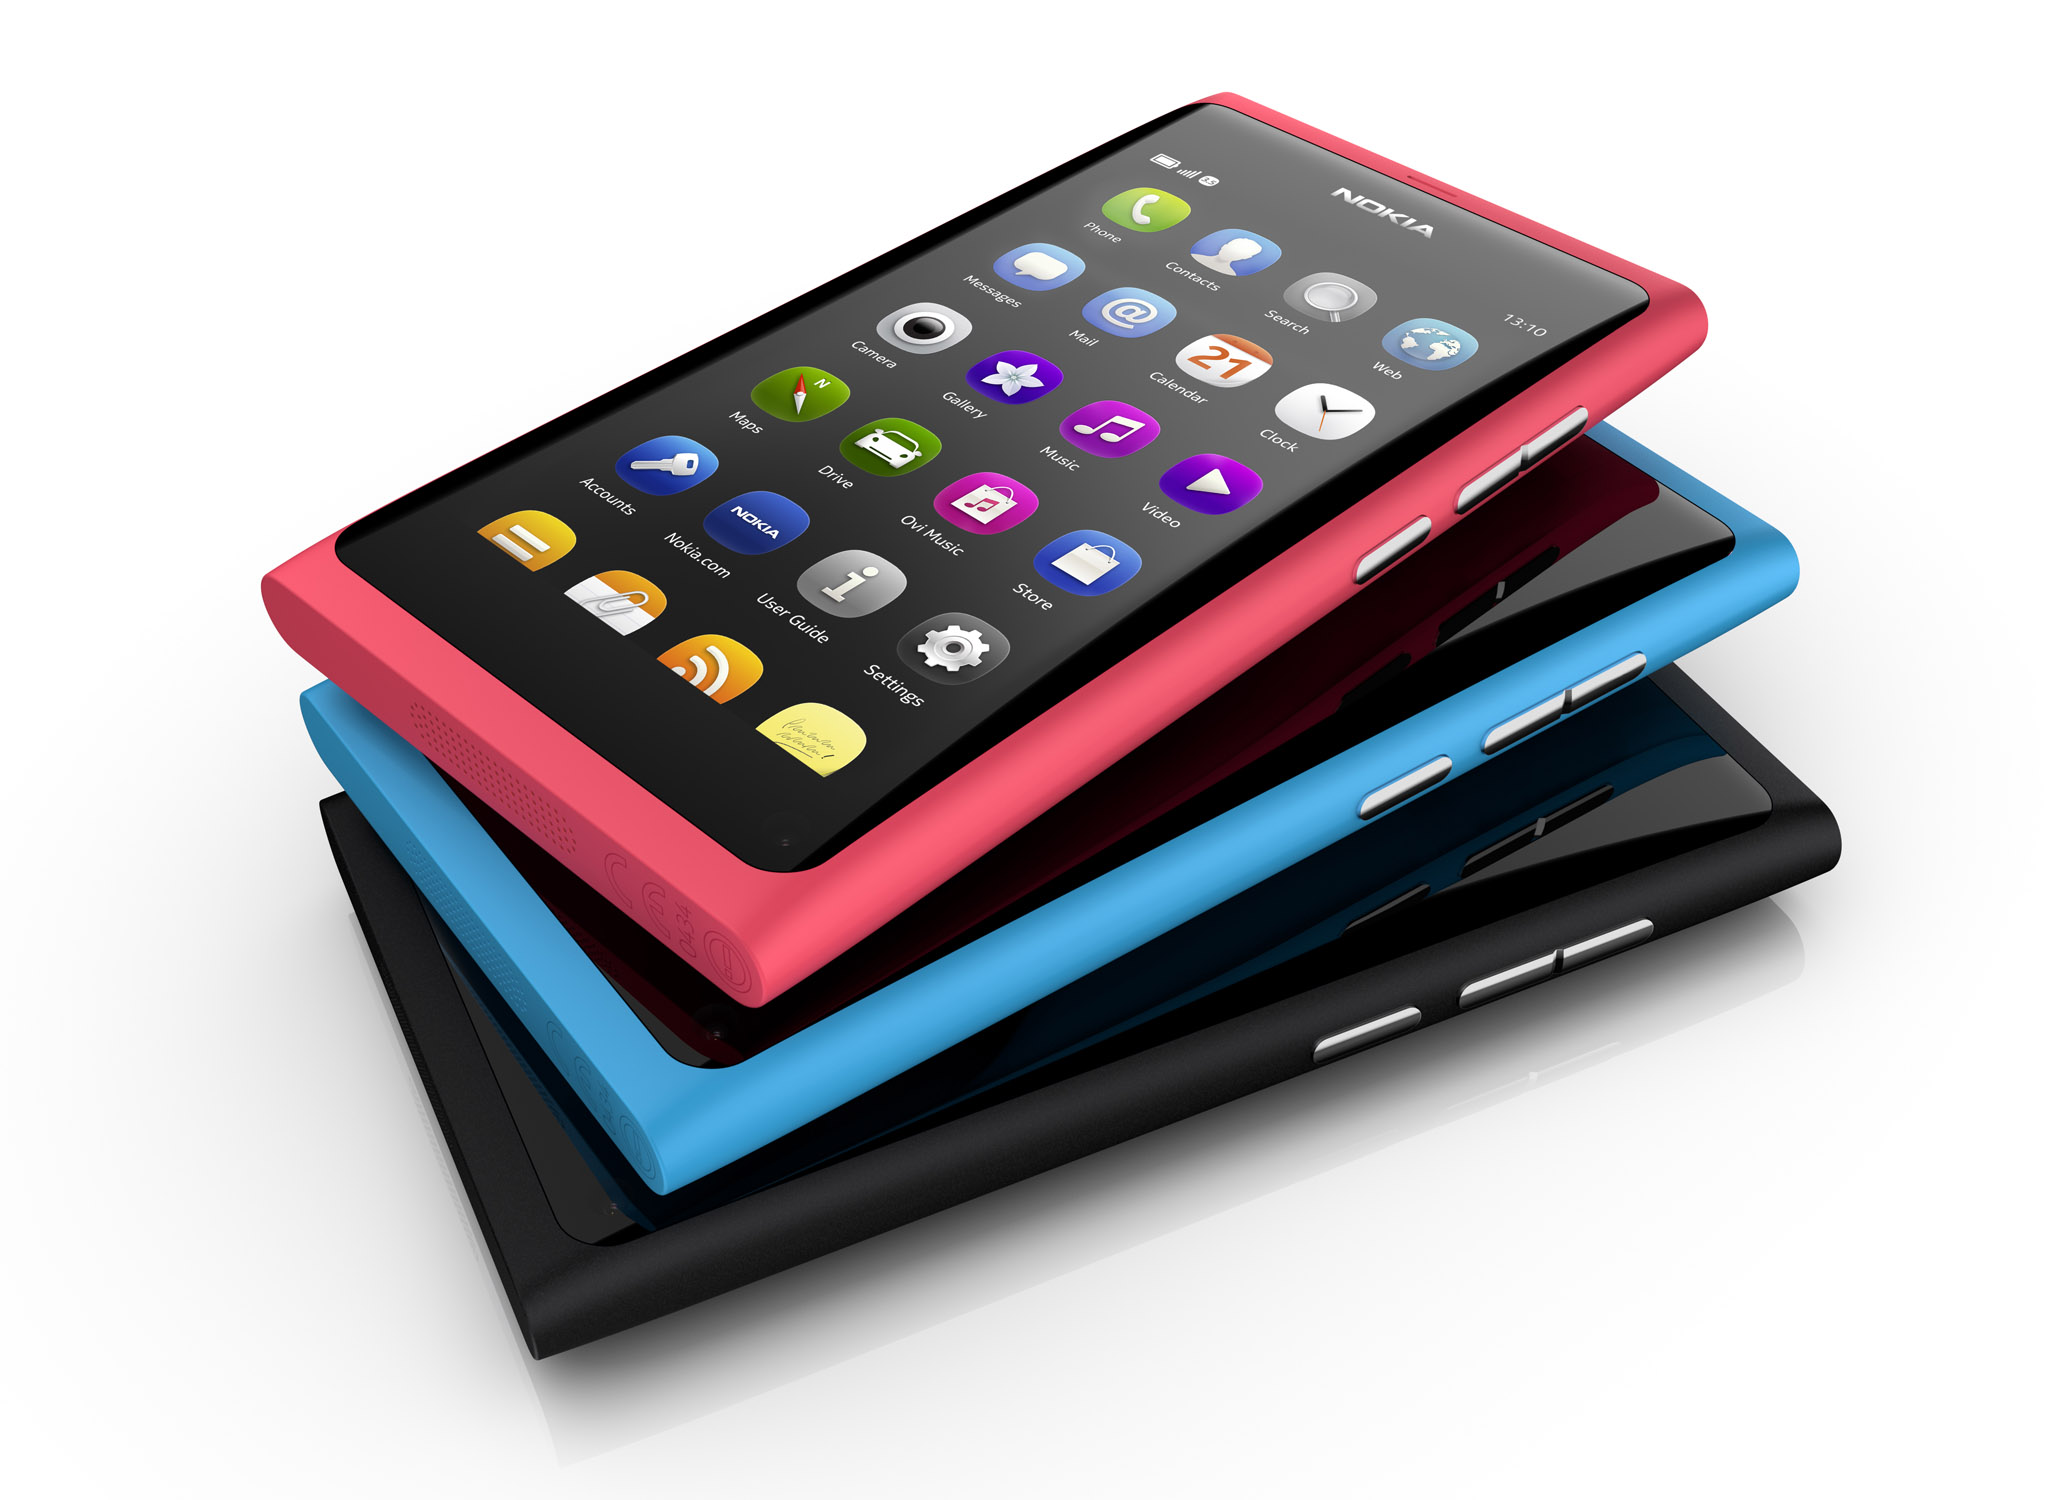 Nokia N9 is Now Officially Available in the Philippines, Priced Decently